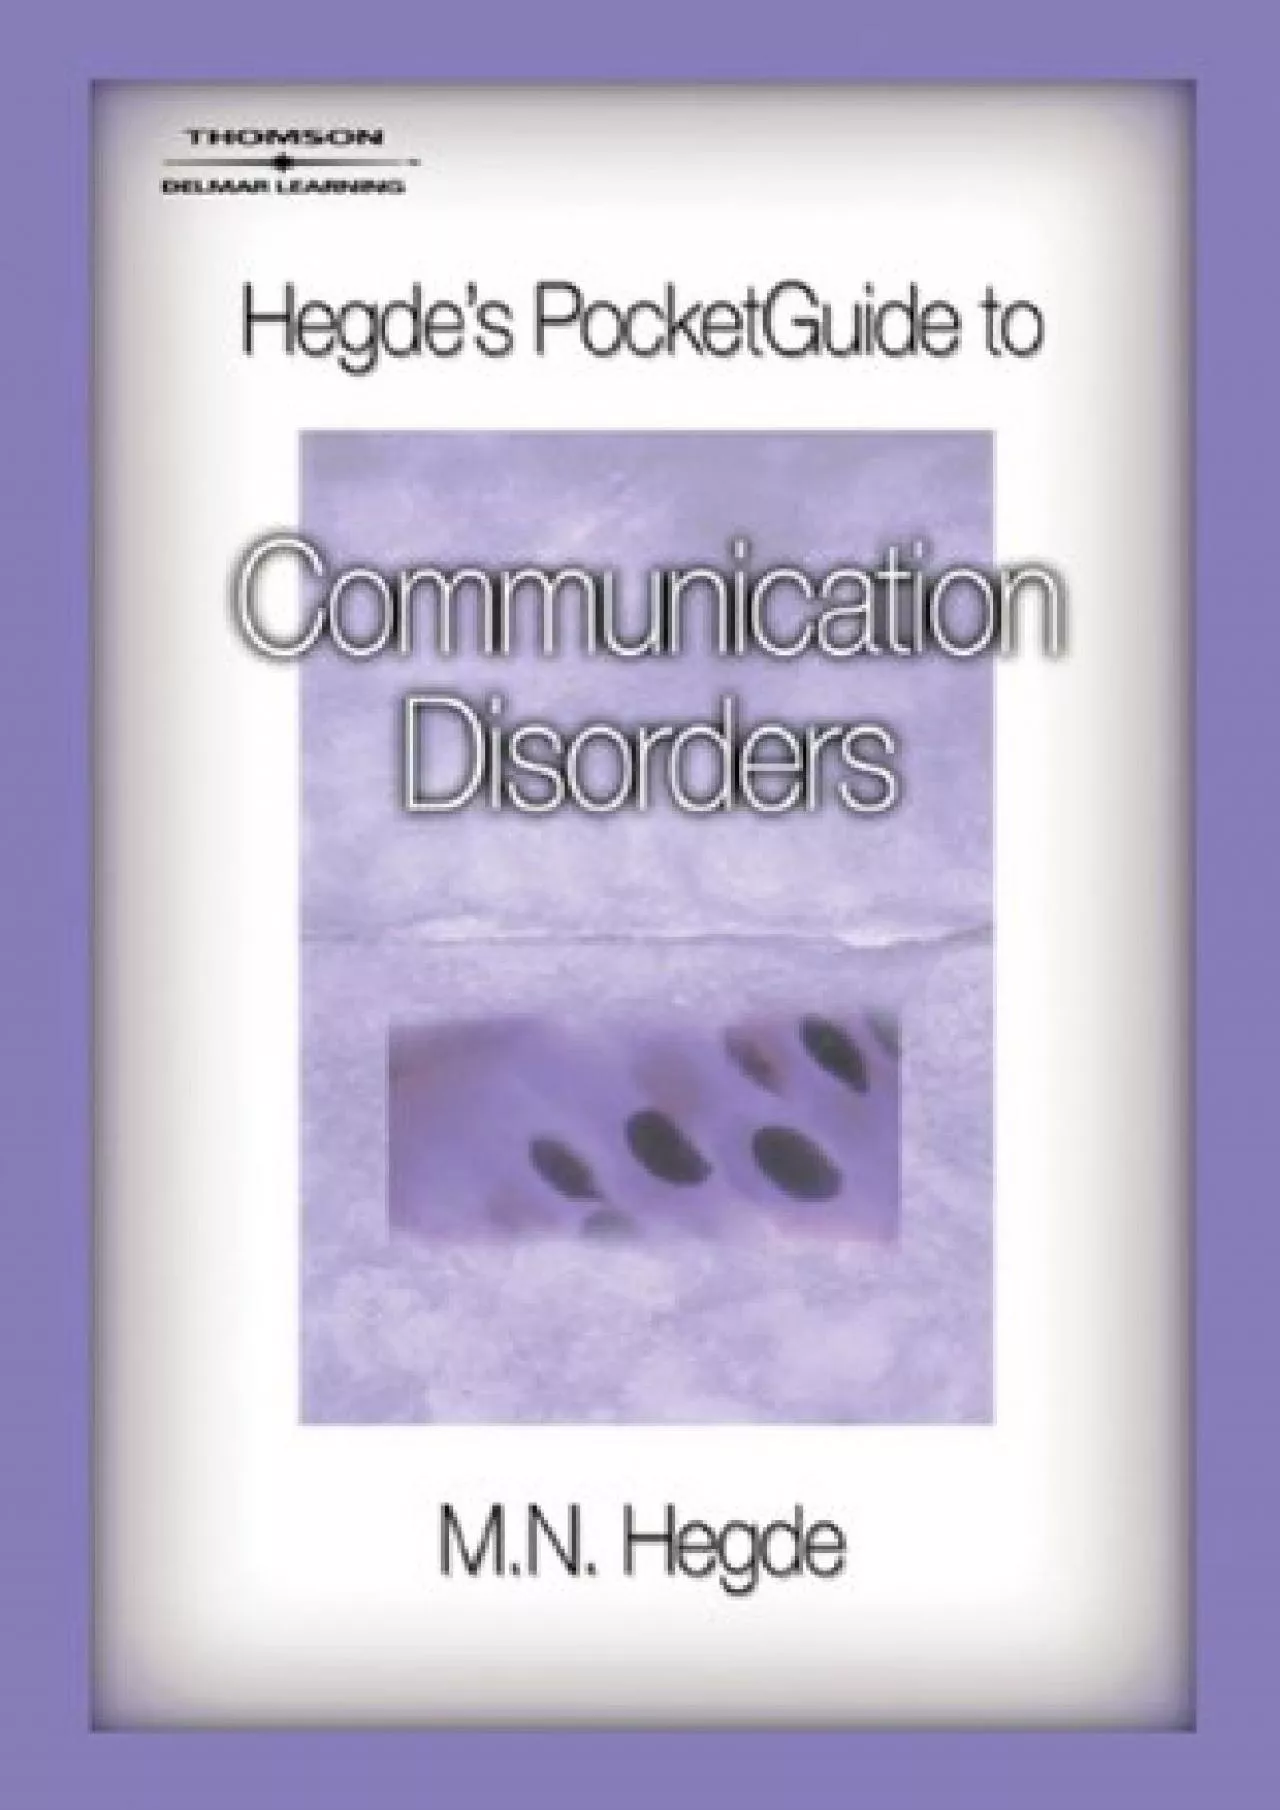 (BOOK)-Hegde\'s PocketGuide to Communication Disorders